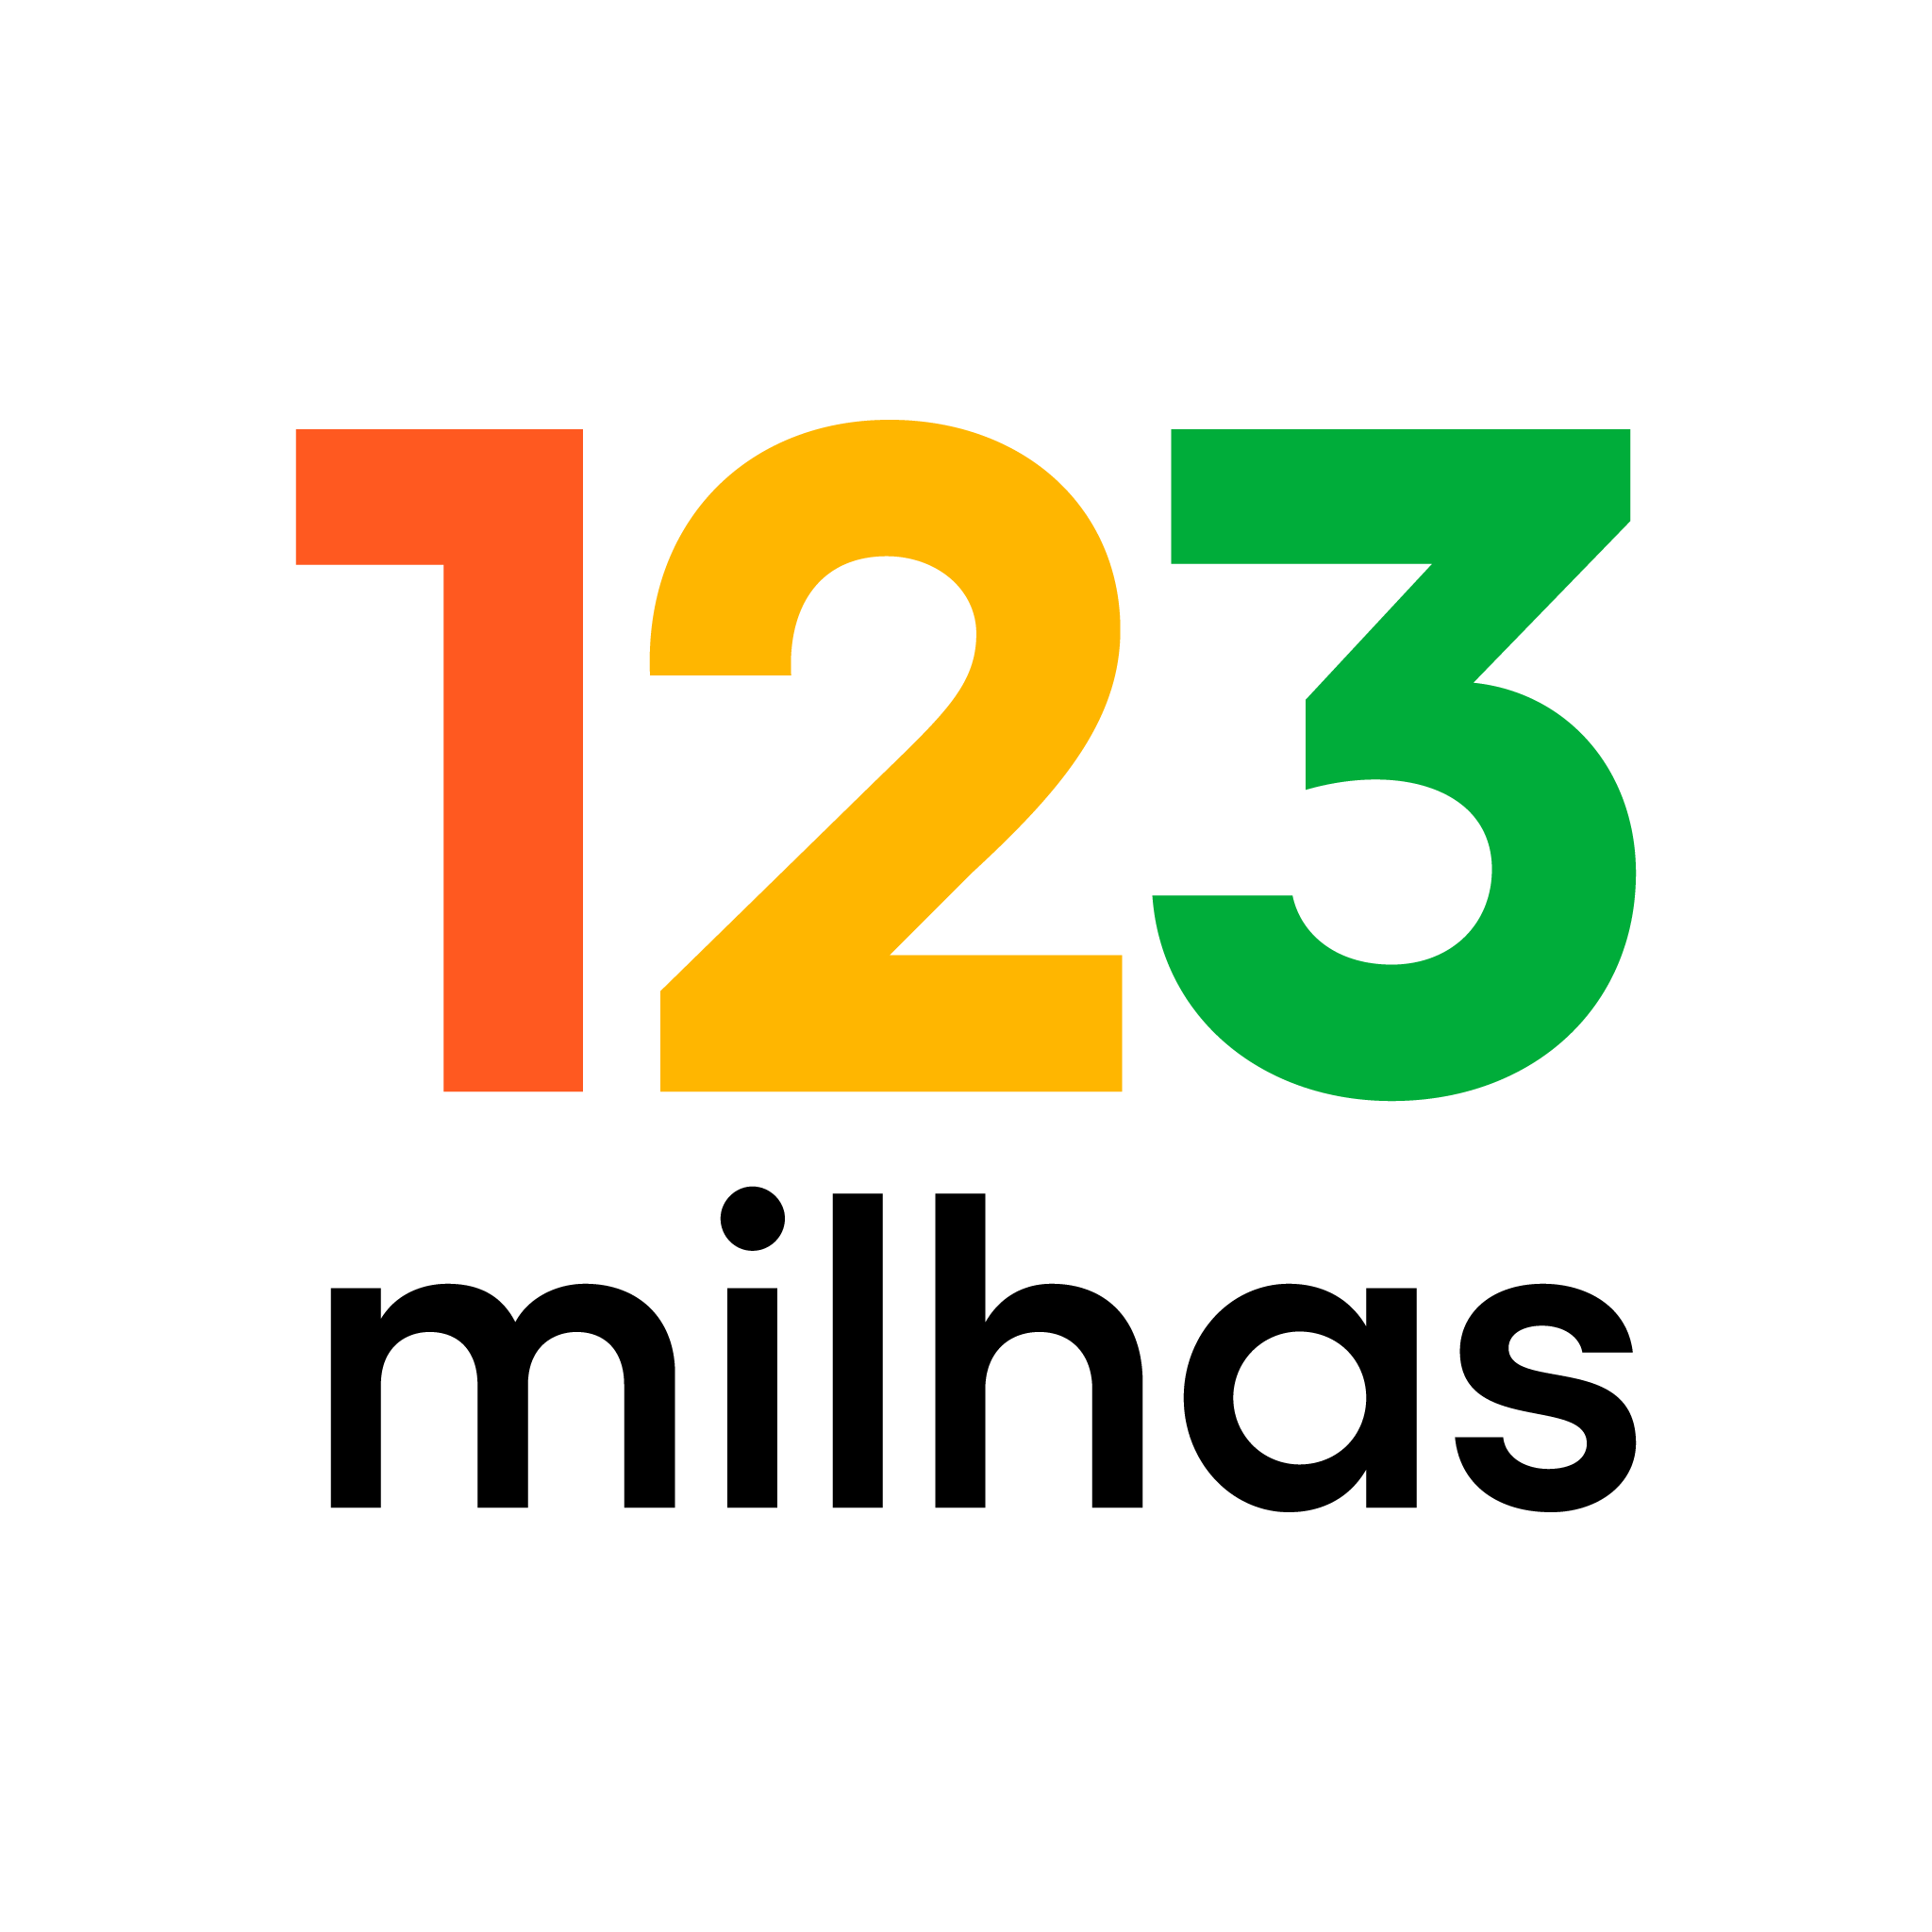 The judge suspends the process of recovering judicial 123 millas